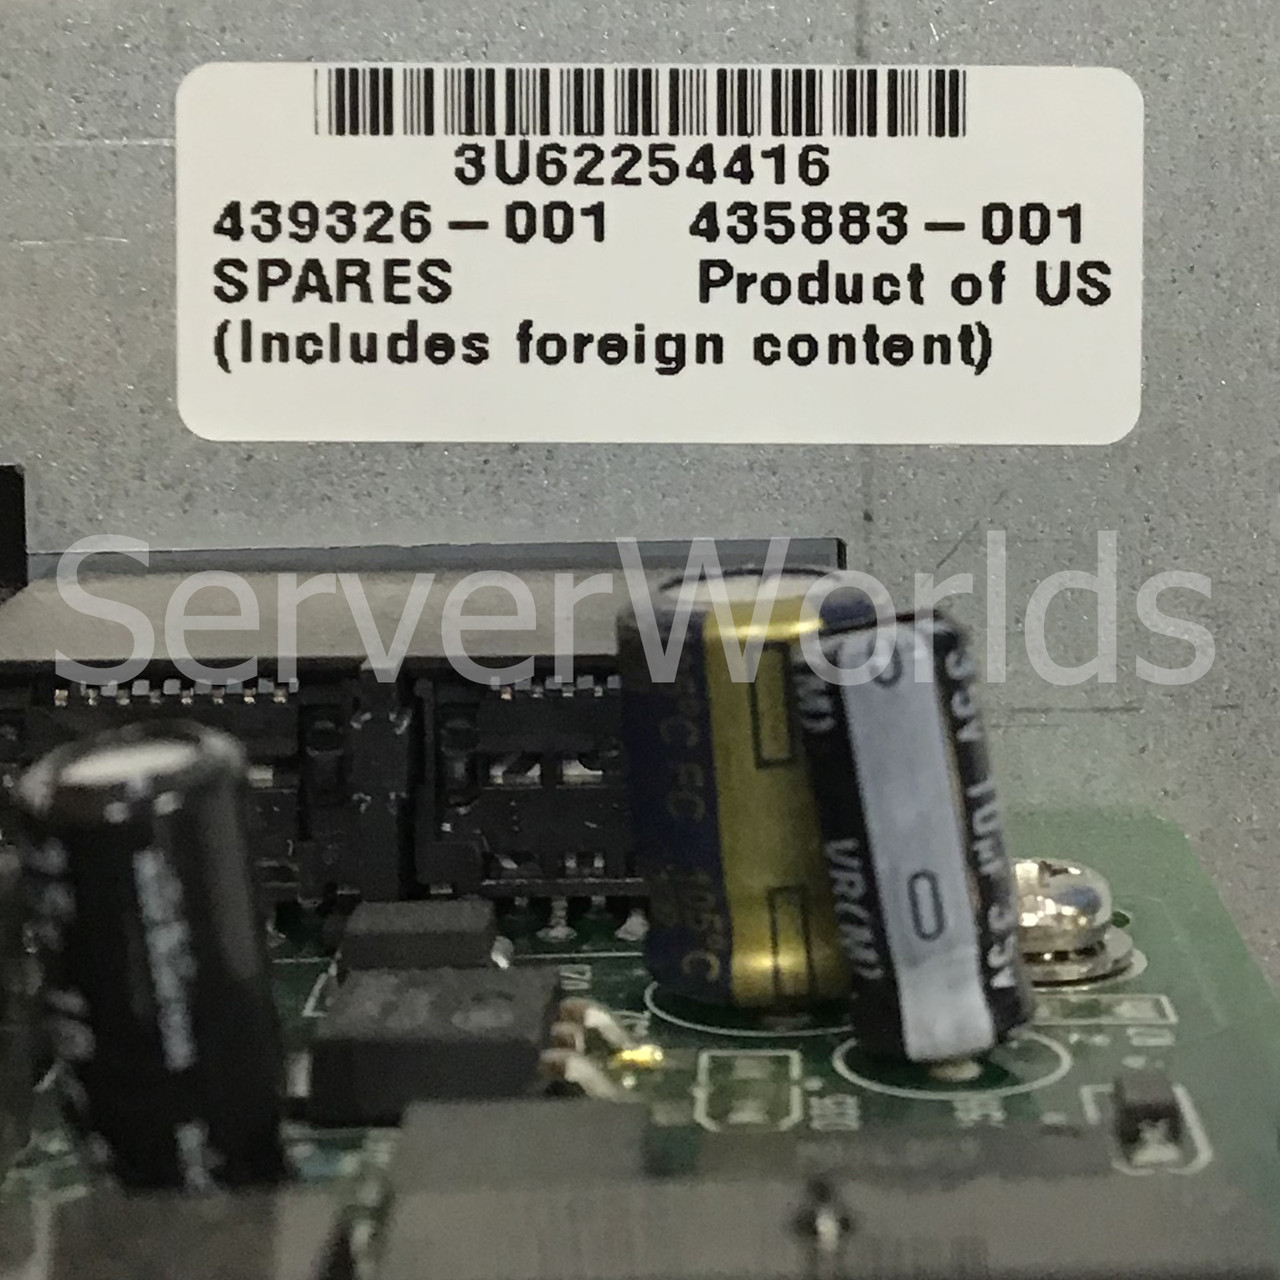 HP 439326-001 Parallel UPS Card 435883-001